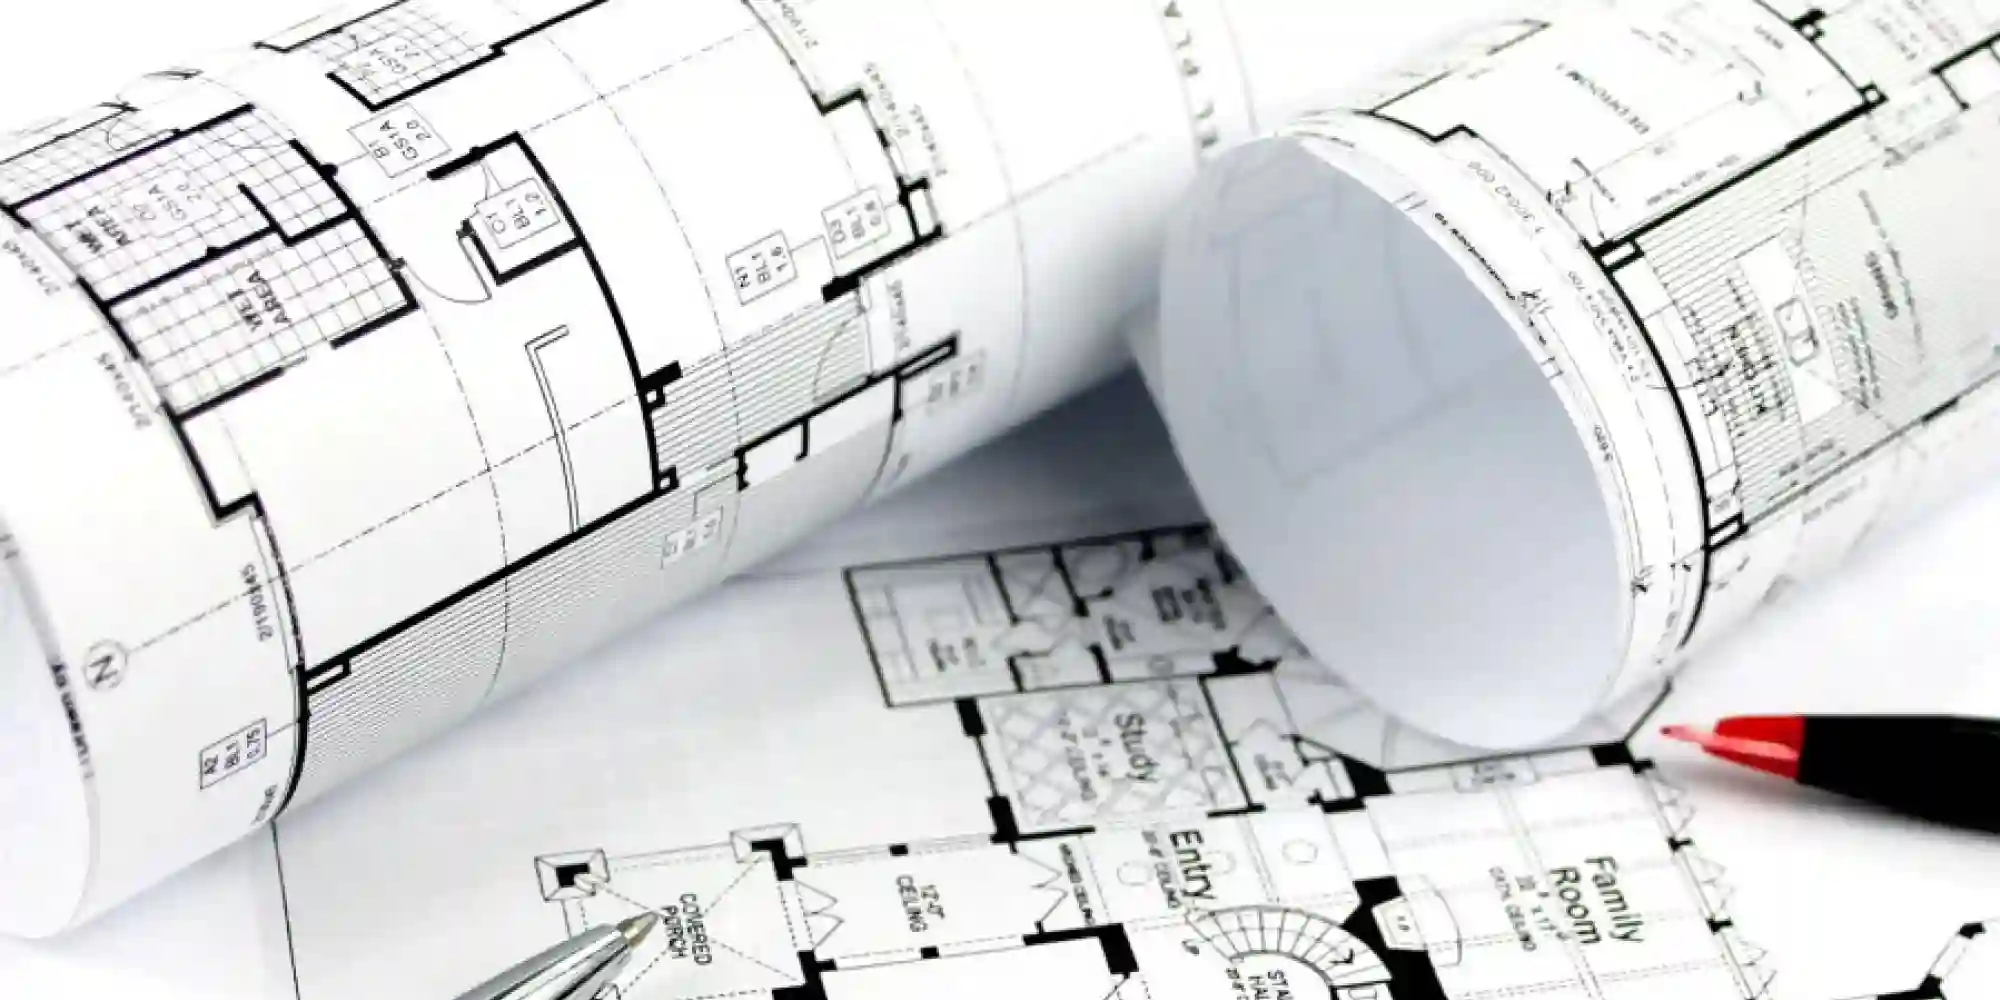 Image of structural engineering drawings